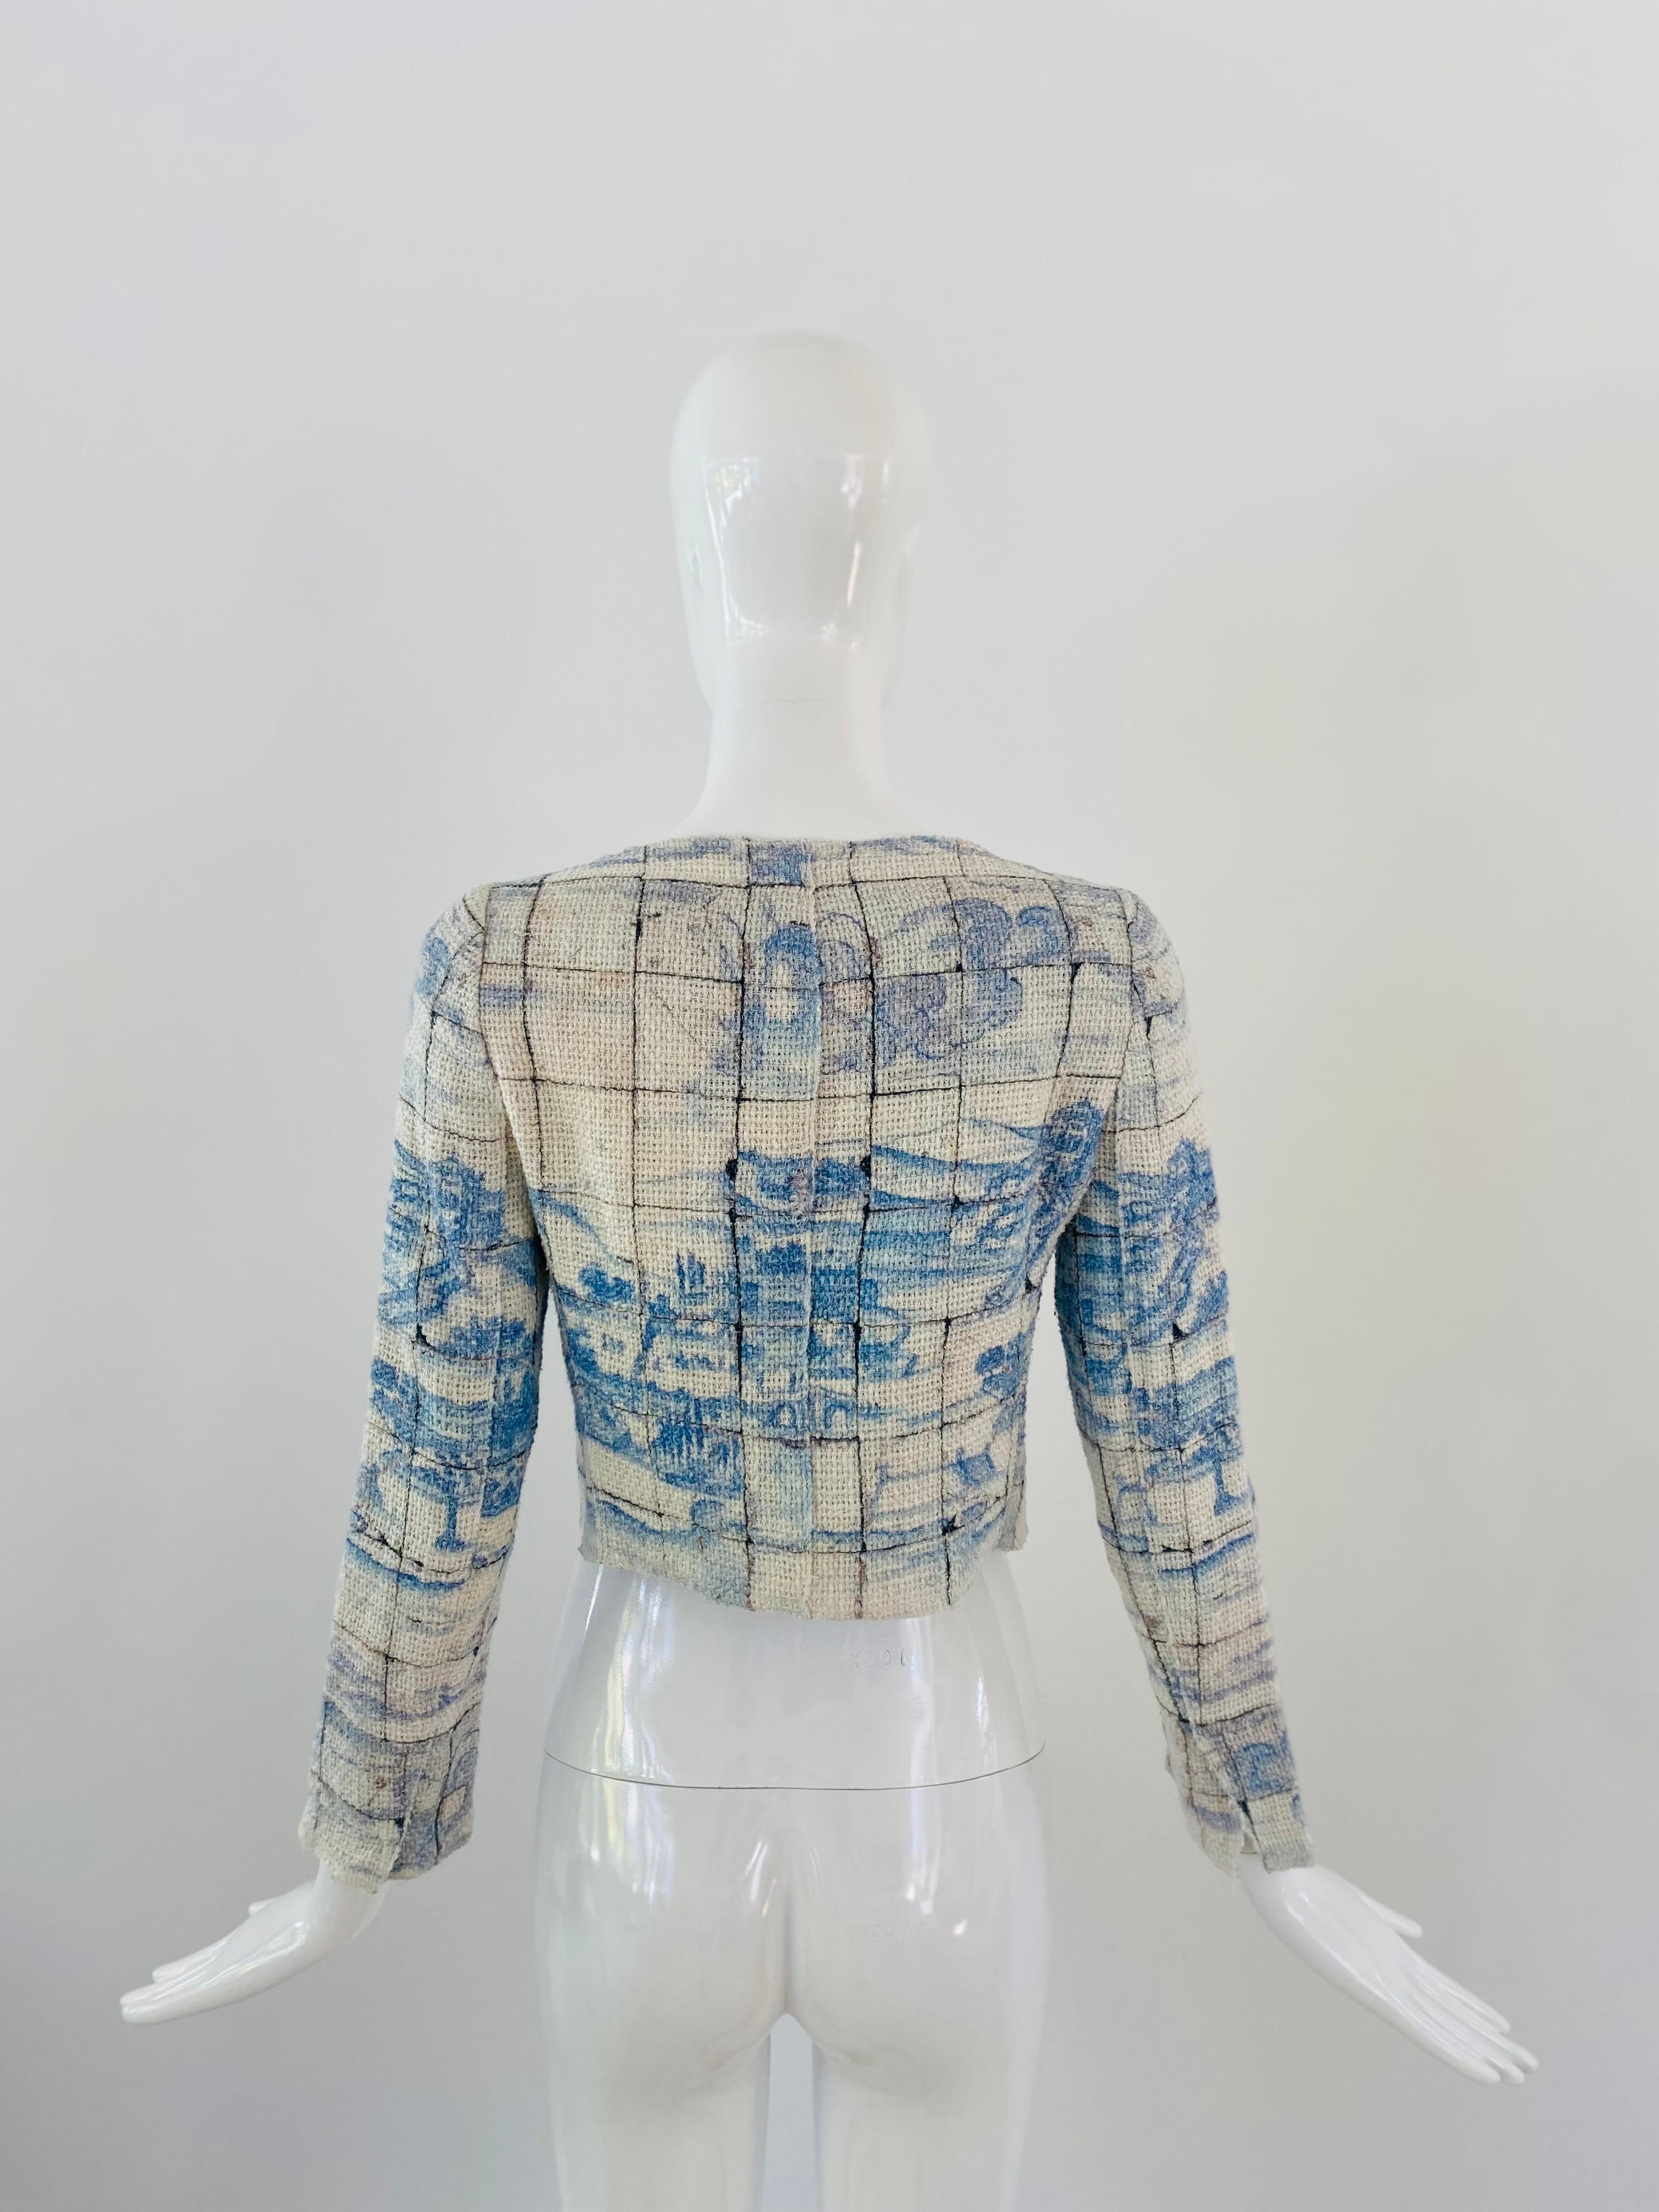 Cropped Prada jacket in white and sky blue woven cotton /linen mix with snap buttons, a boat neck and long sleeves. The print is a beautiful Chinese chinoiserie print and the inside is lined with the same print in a soft silk. Excellent condition.